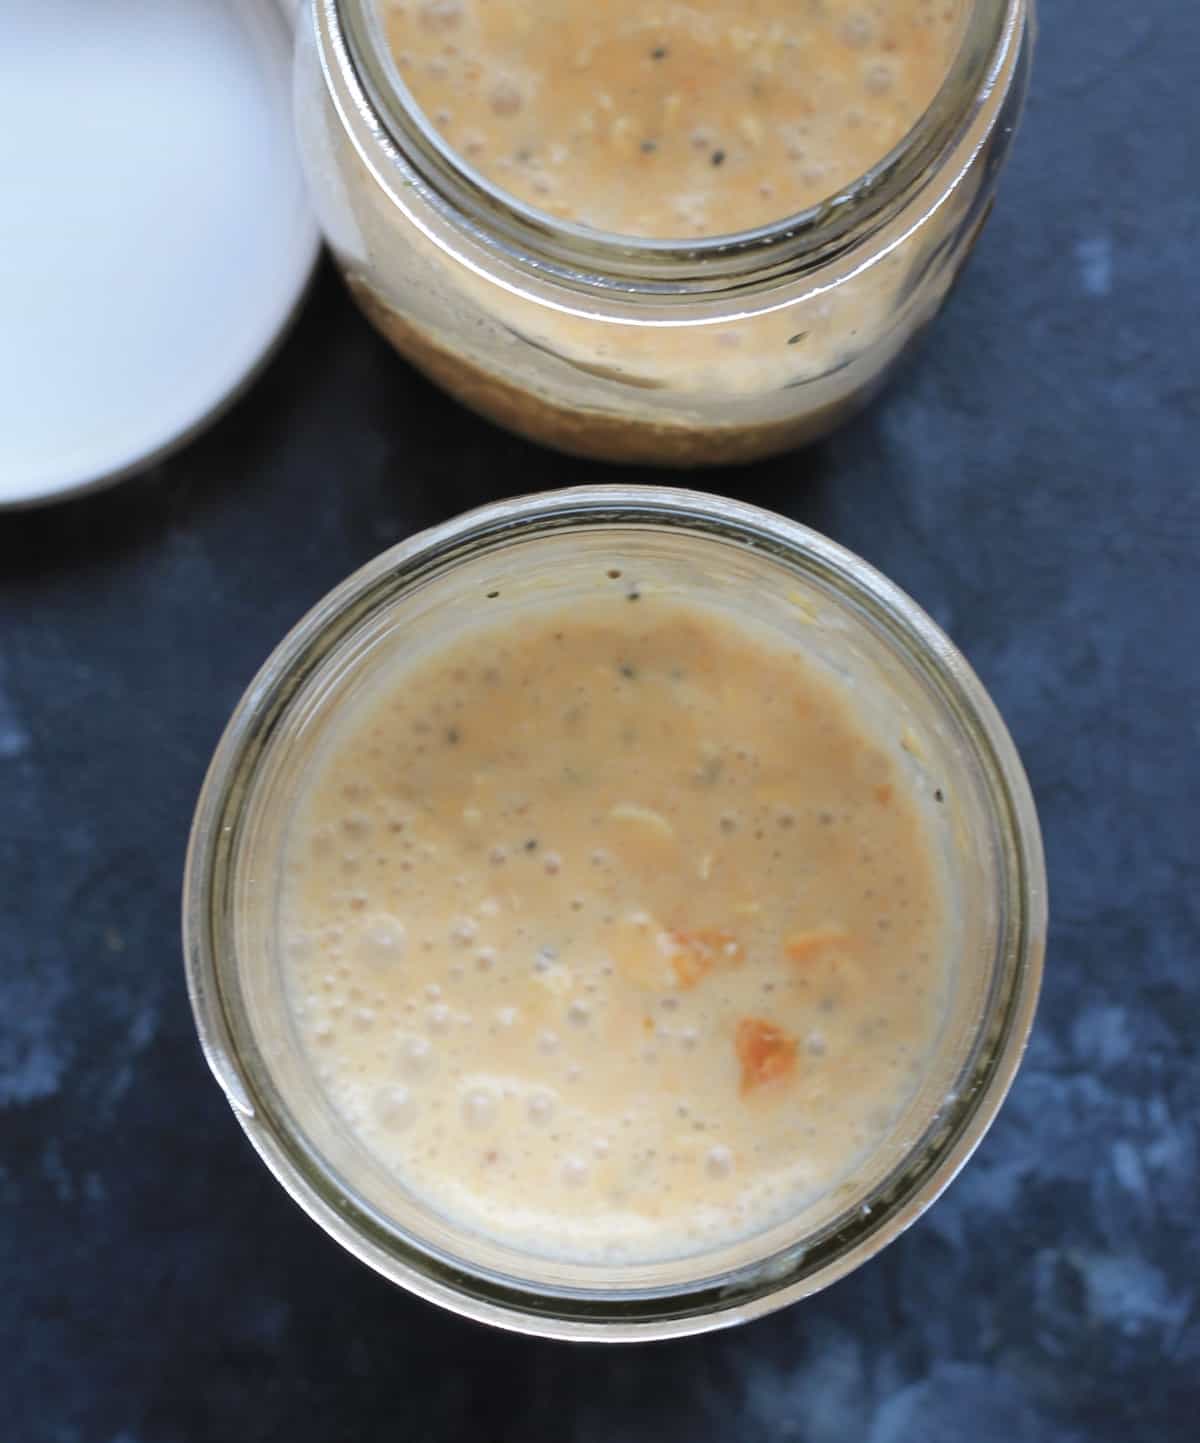 mixed overnight oats in a jar